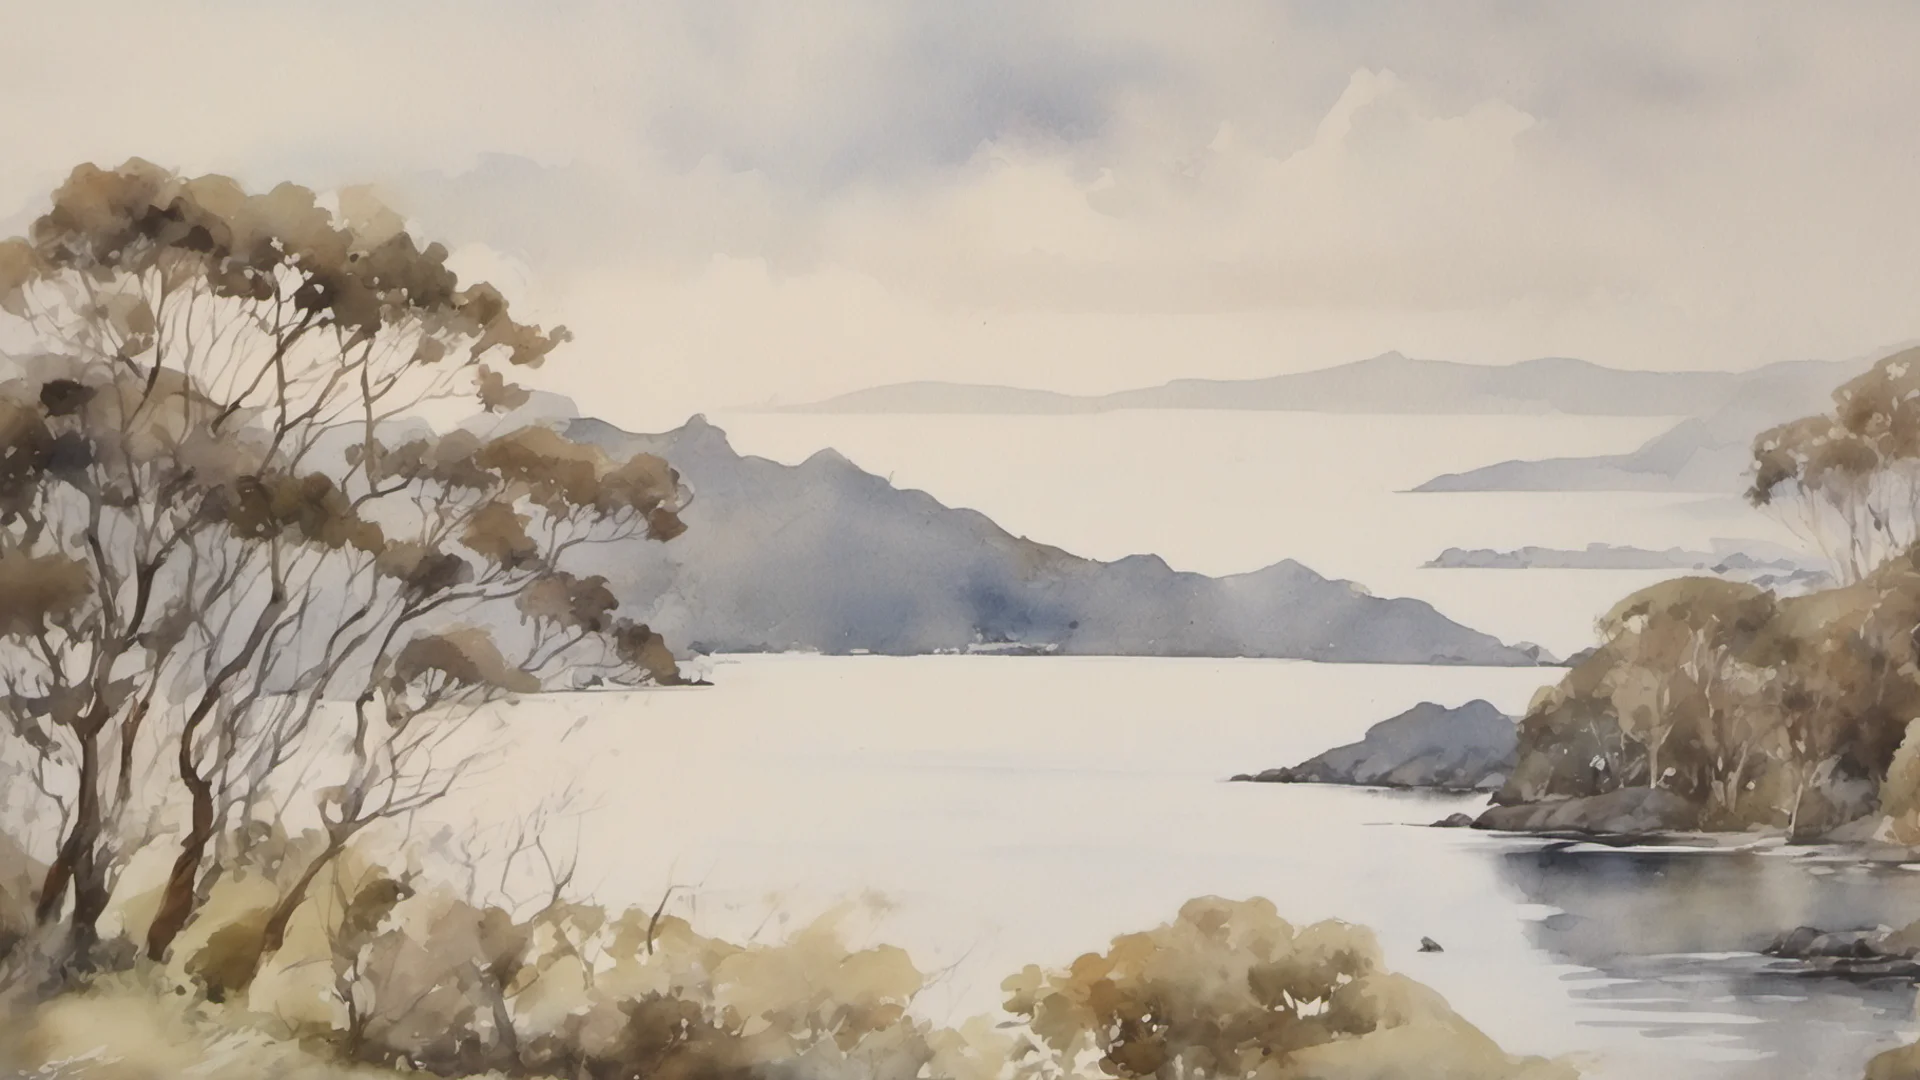 aipicturesque landscape watercolor beautiful neutral tones bay of islands grace stunning   good looking trending fantastic 1 wide